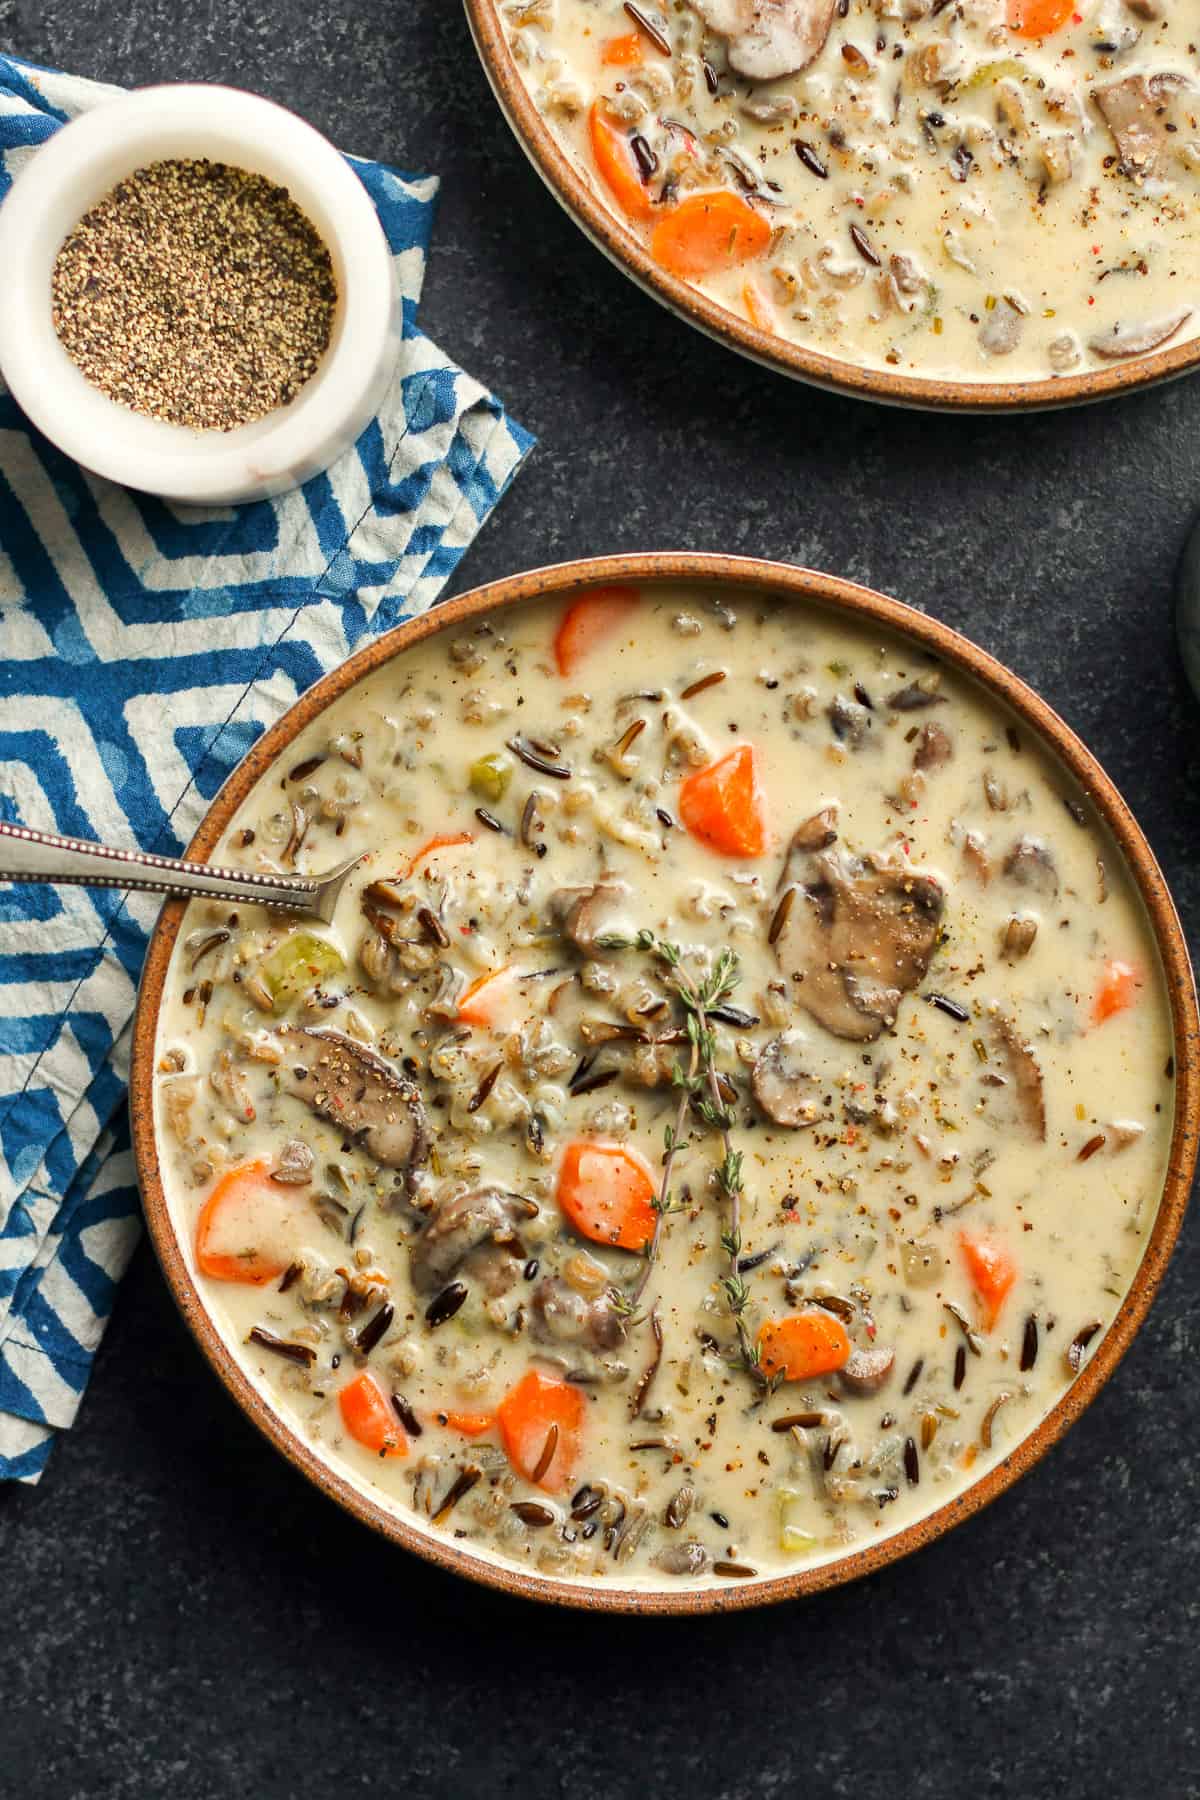 Two bowls of wild rice soup with mushrooms.